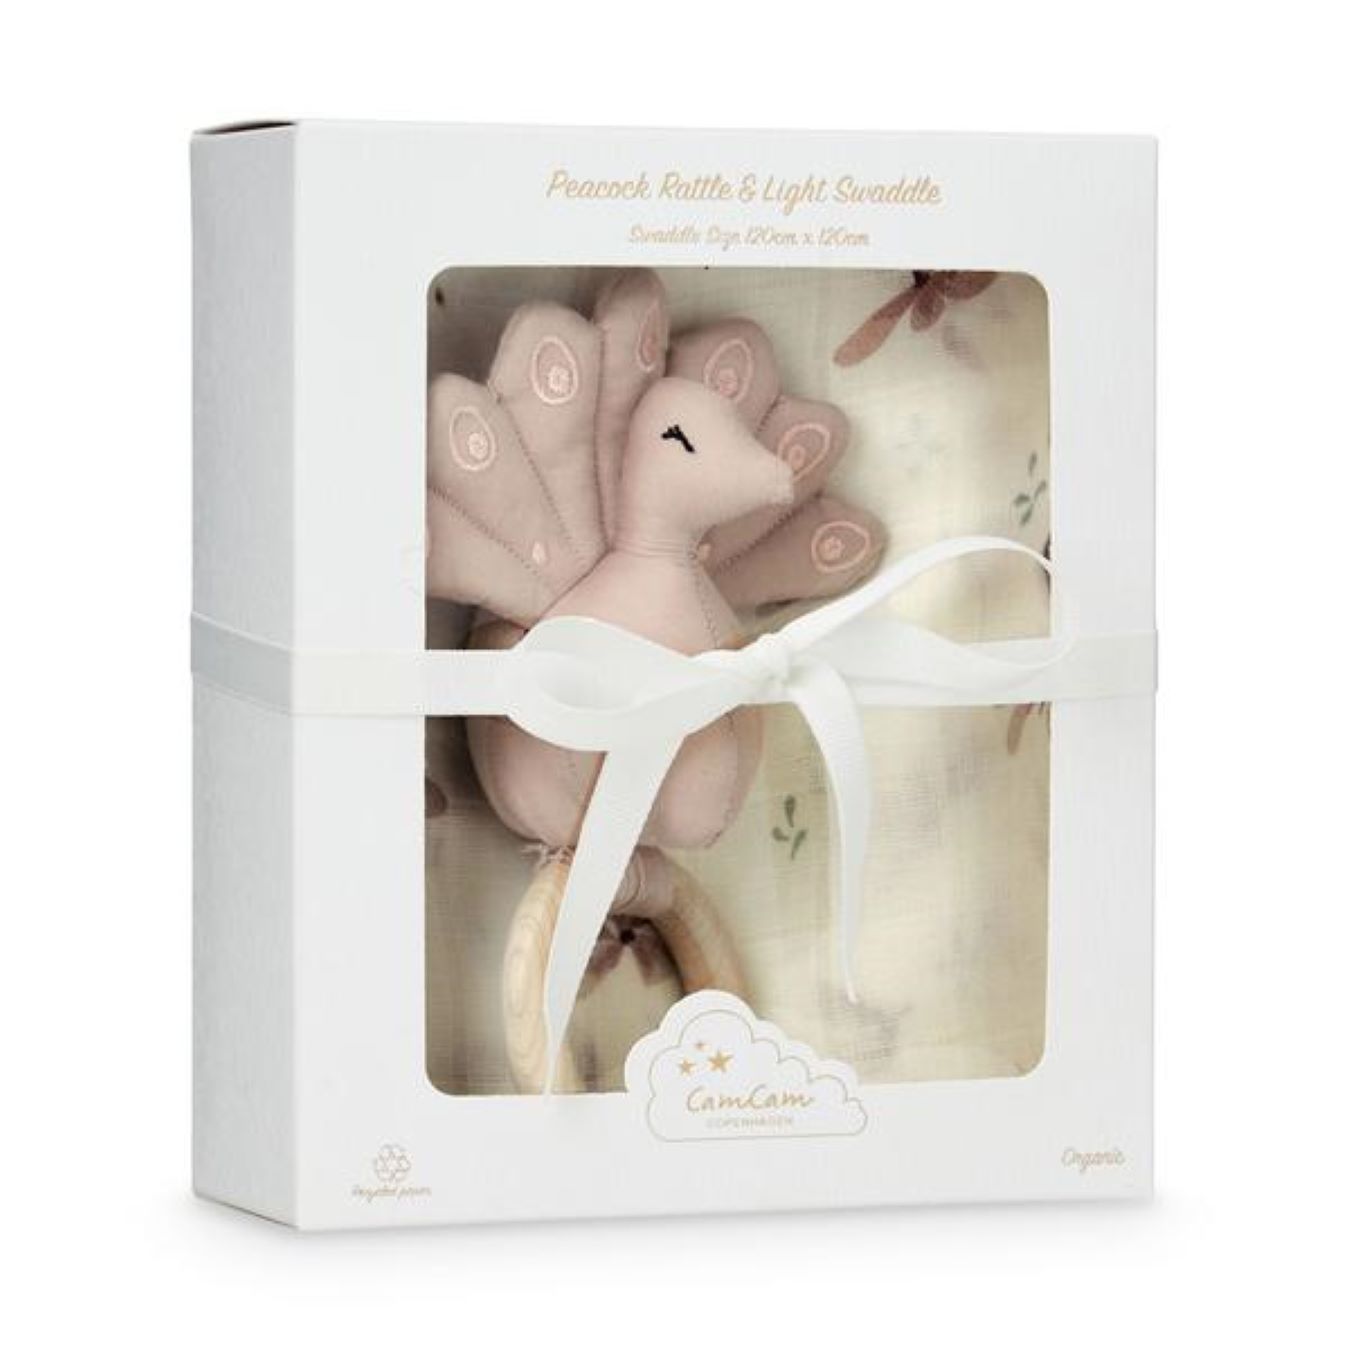 Cam Cam Swaddle and Peacock Rattle Gift Box in Windflower Creme - Scandibørn